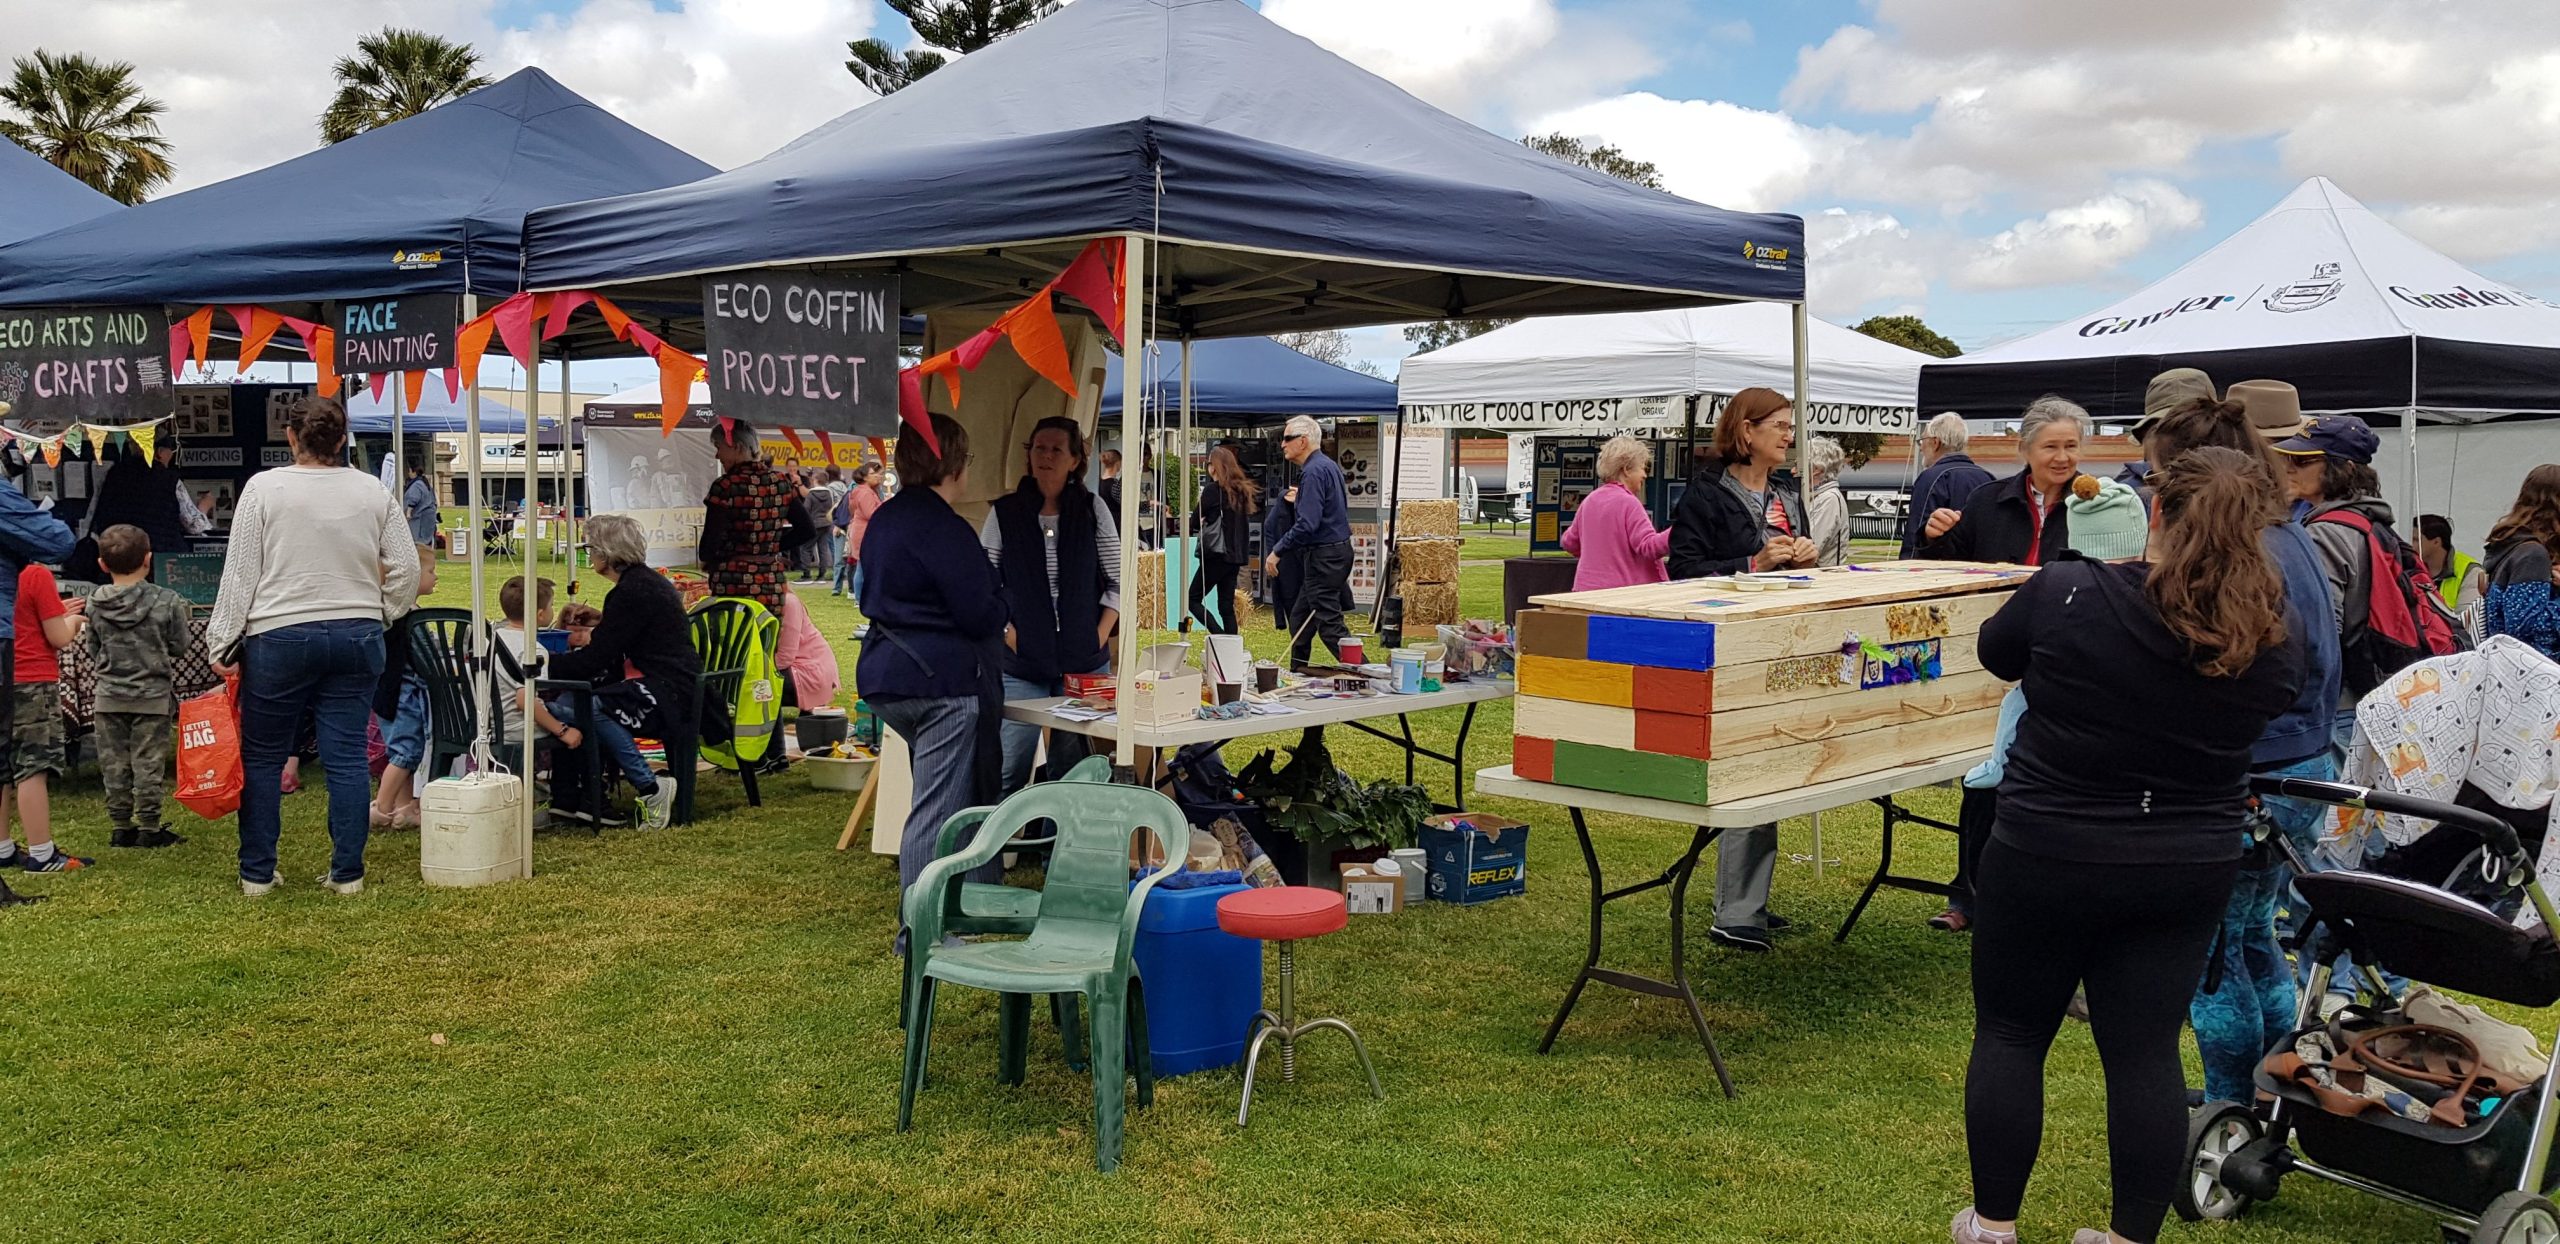 Launch of the Eco Coffin Project at the 2019 Gawler Sustainable Living Festival